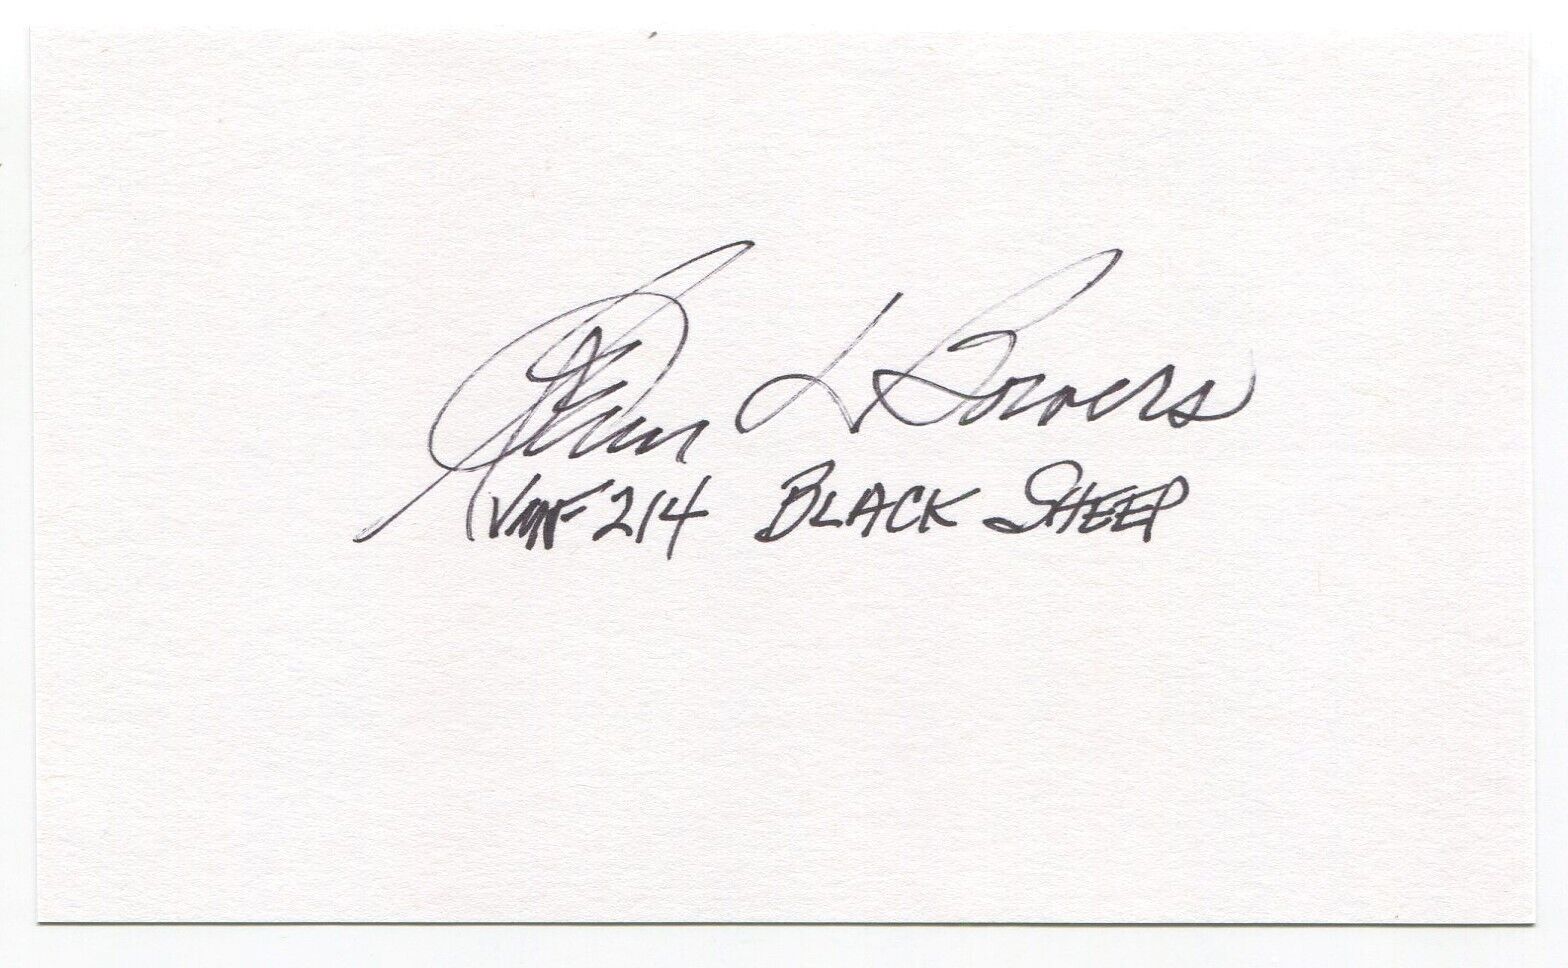 Glenn Bowers Signed 3x5 Index Card Autographed WWII Black Sheep Pilot VMF214